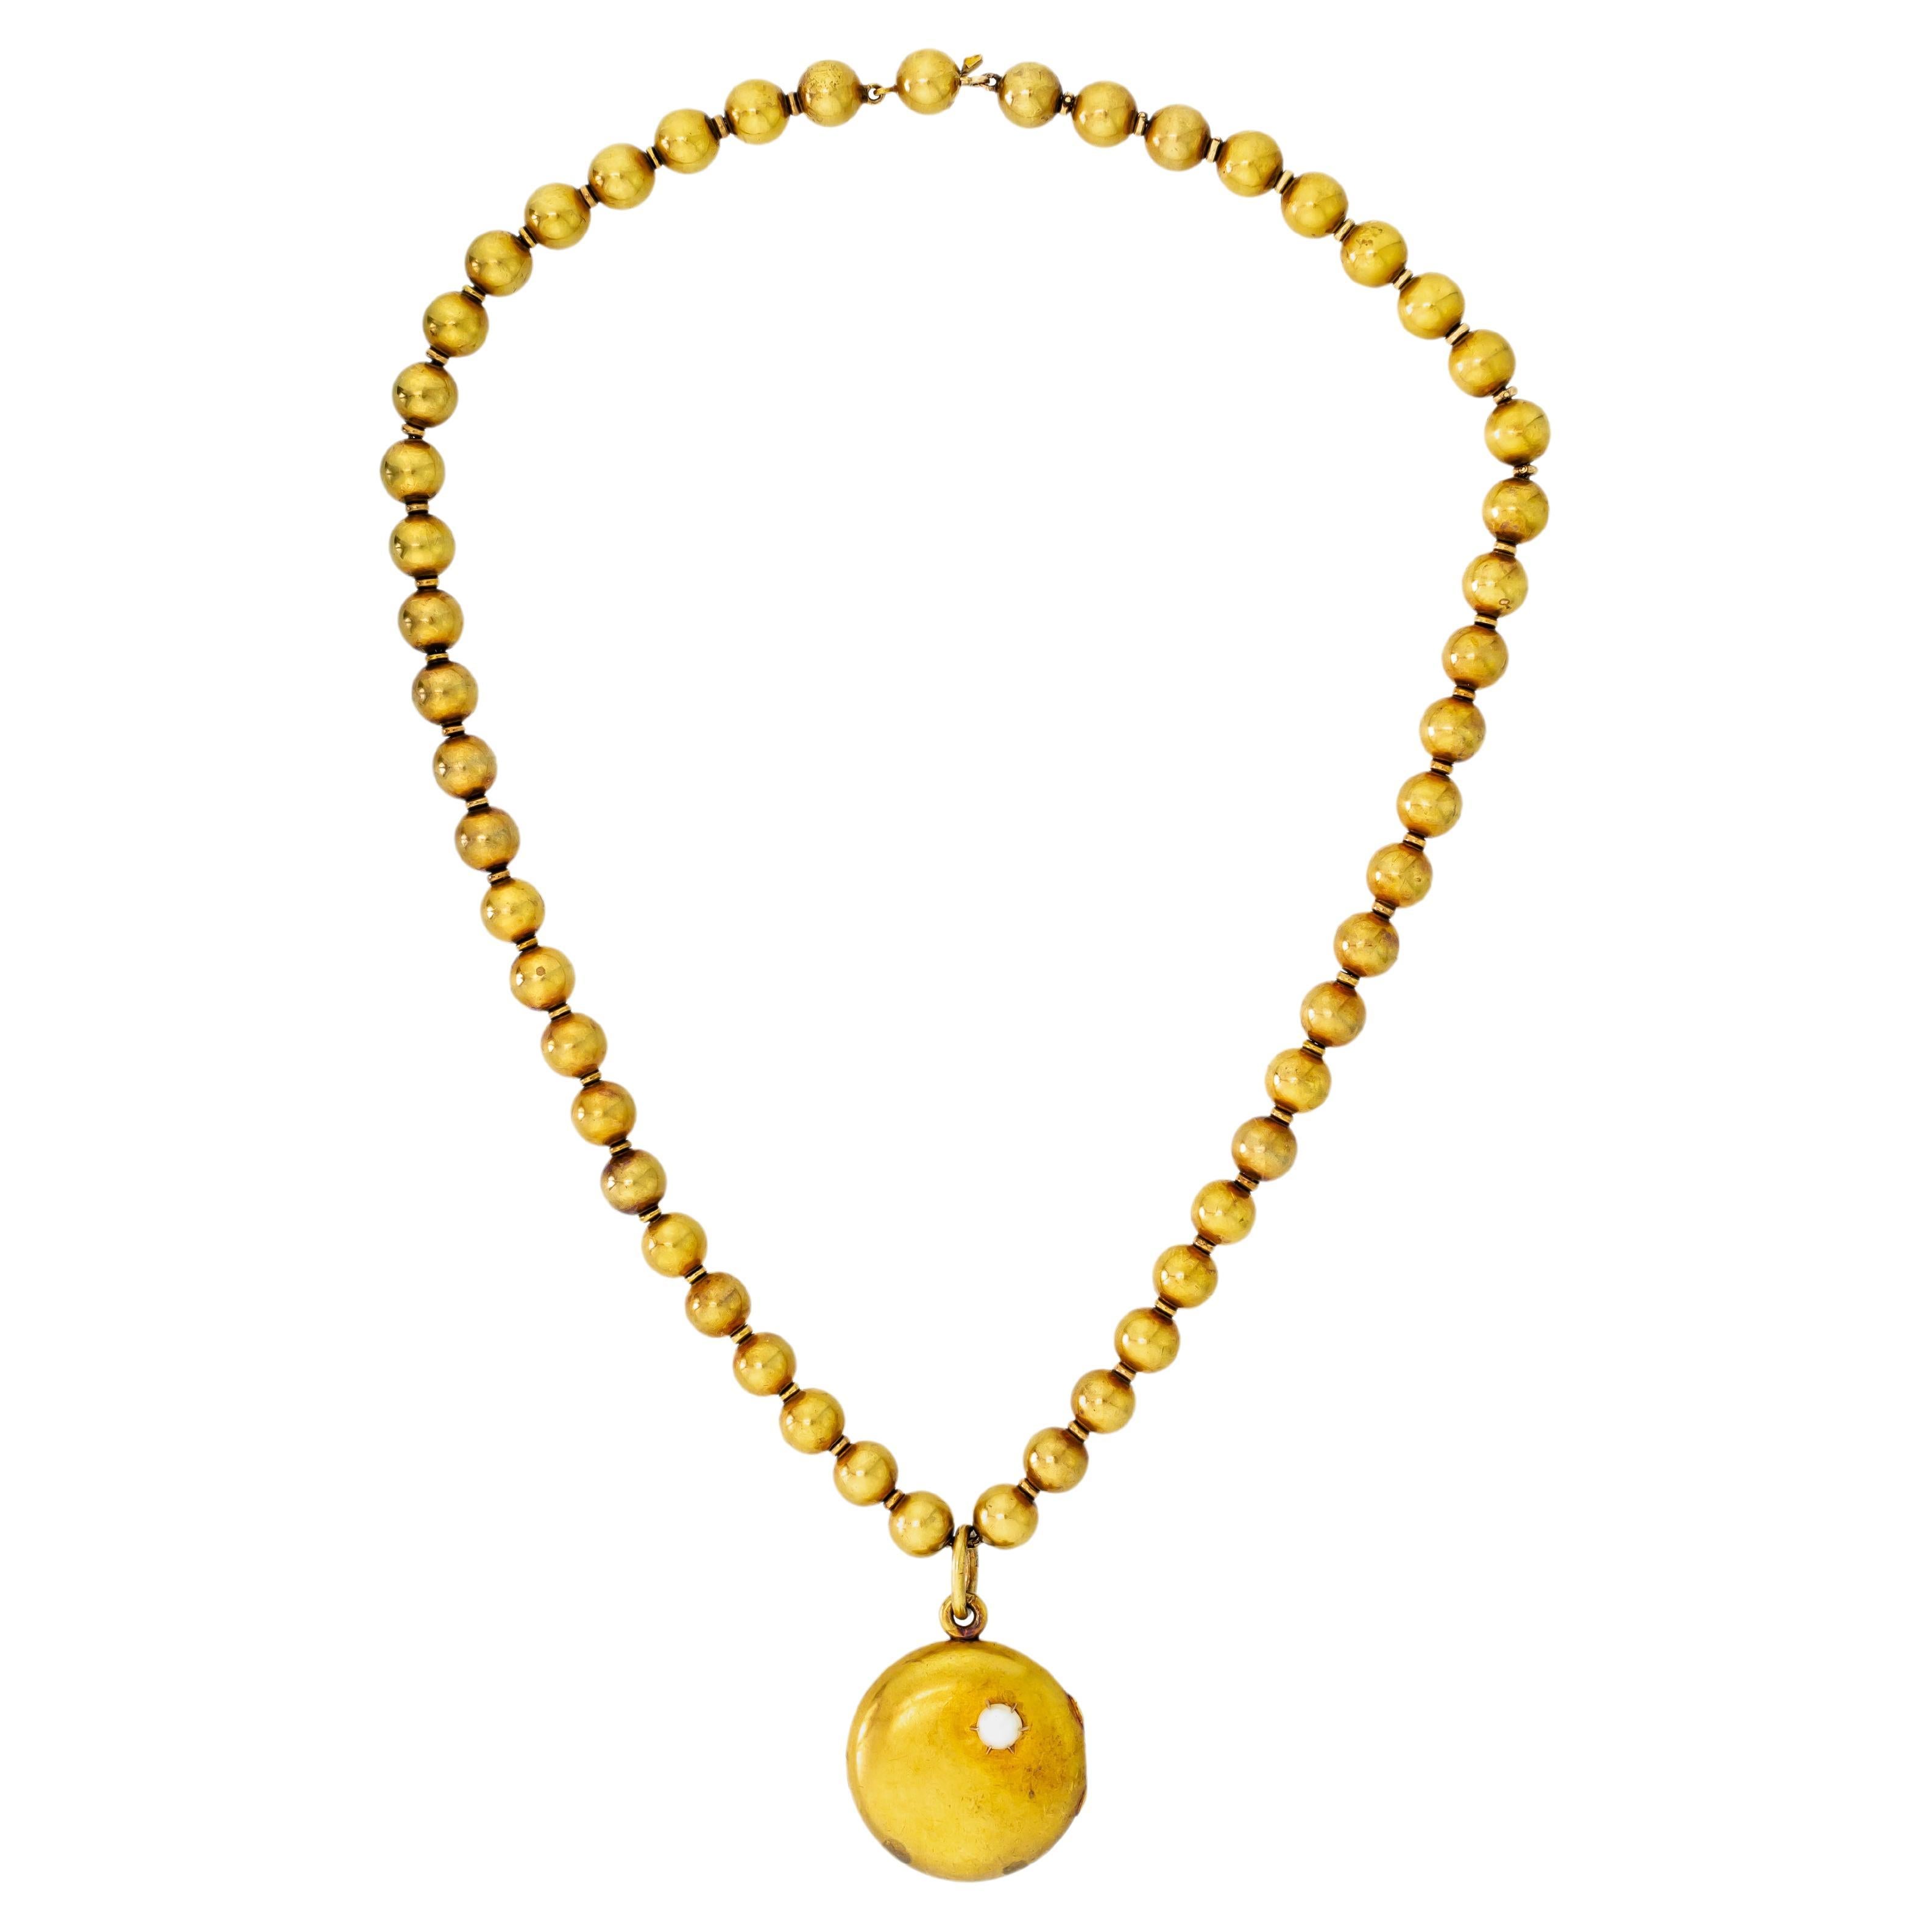 Antique 18Kt Yellow Gold Ball and Locket Necklace